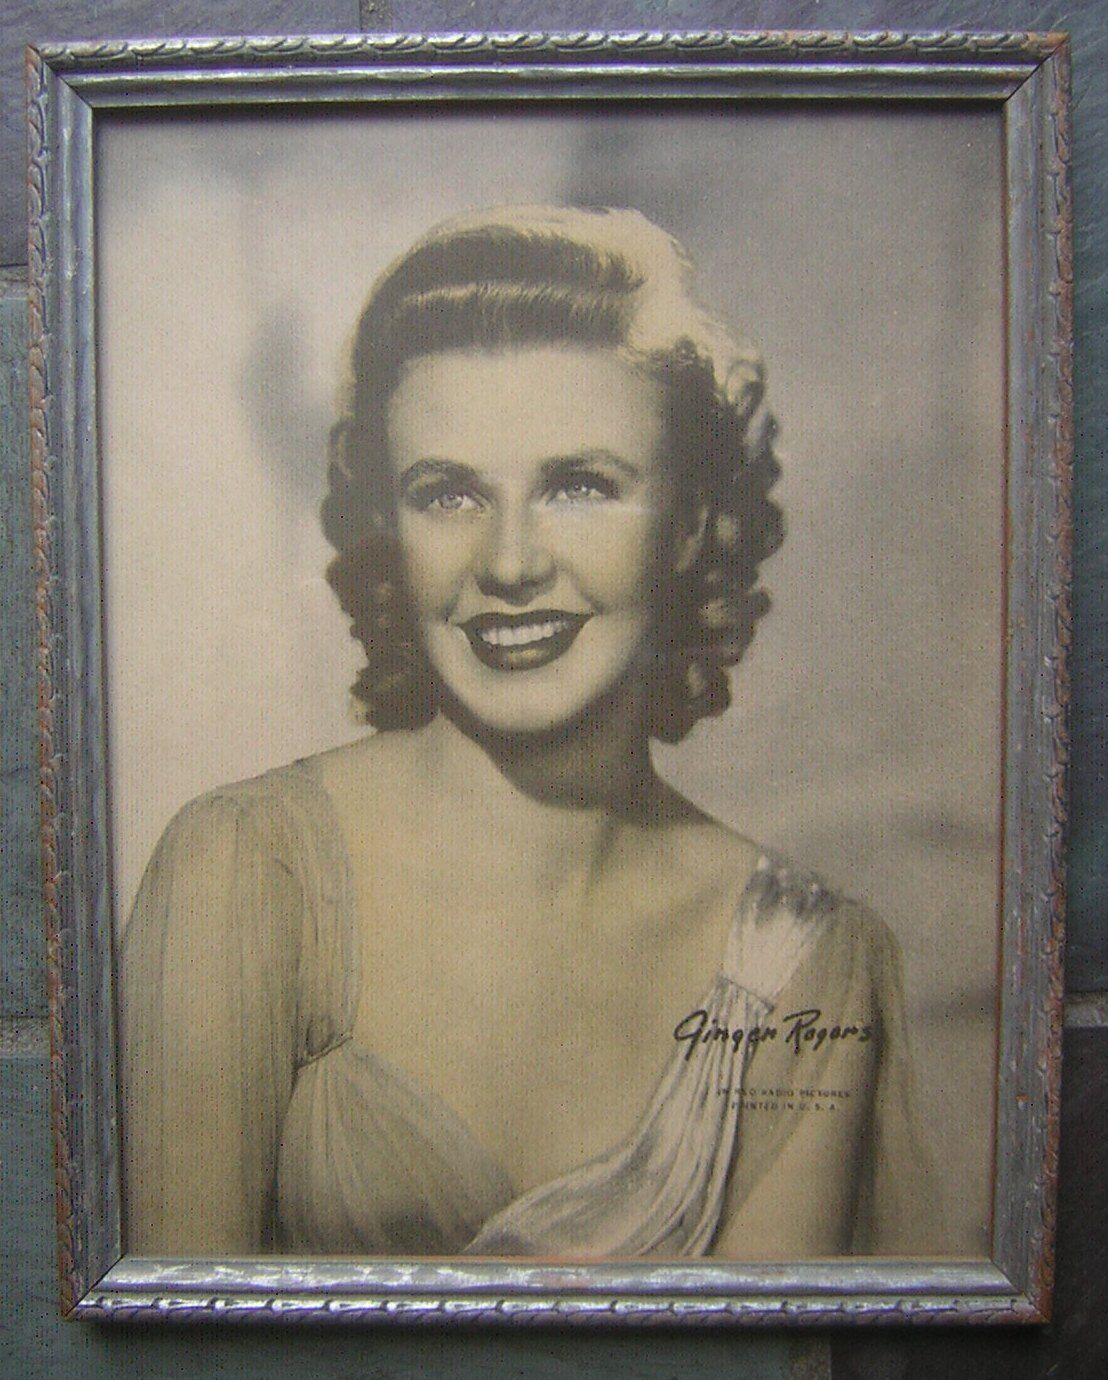 Vintage 1930's Ginger Rogers 8x10" Movie Star Photo In Original Picture Frame